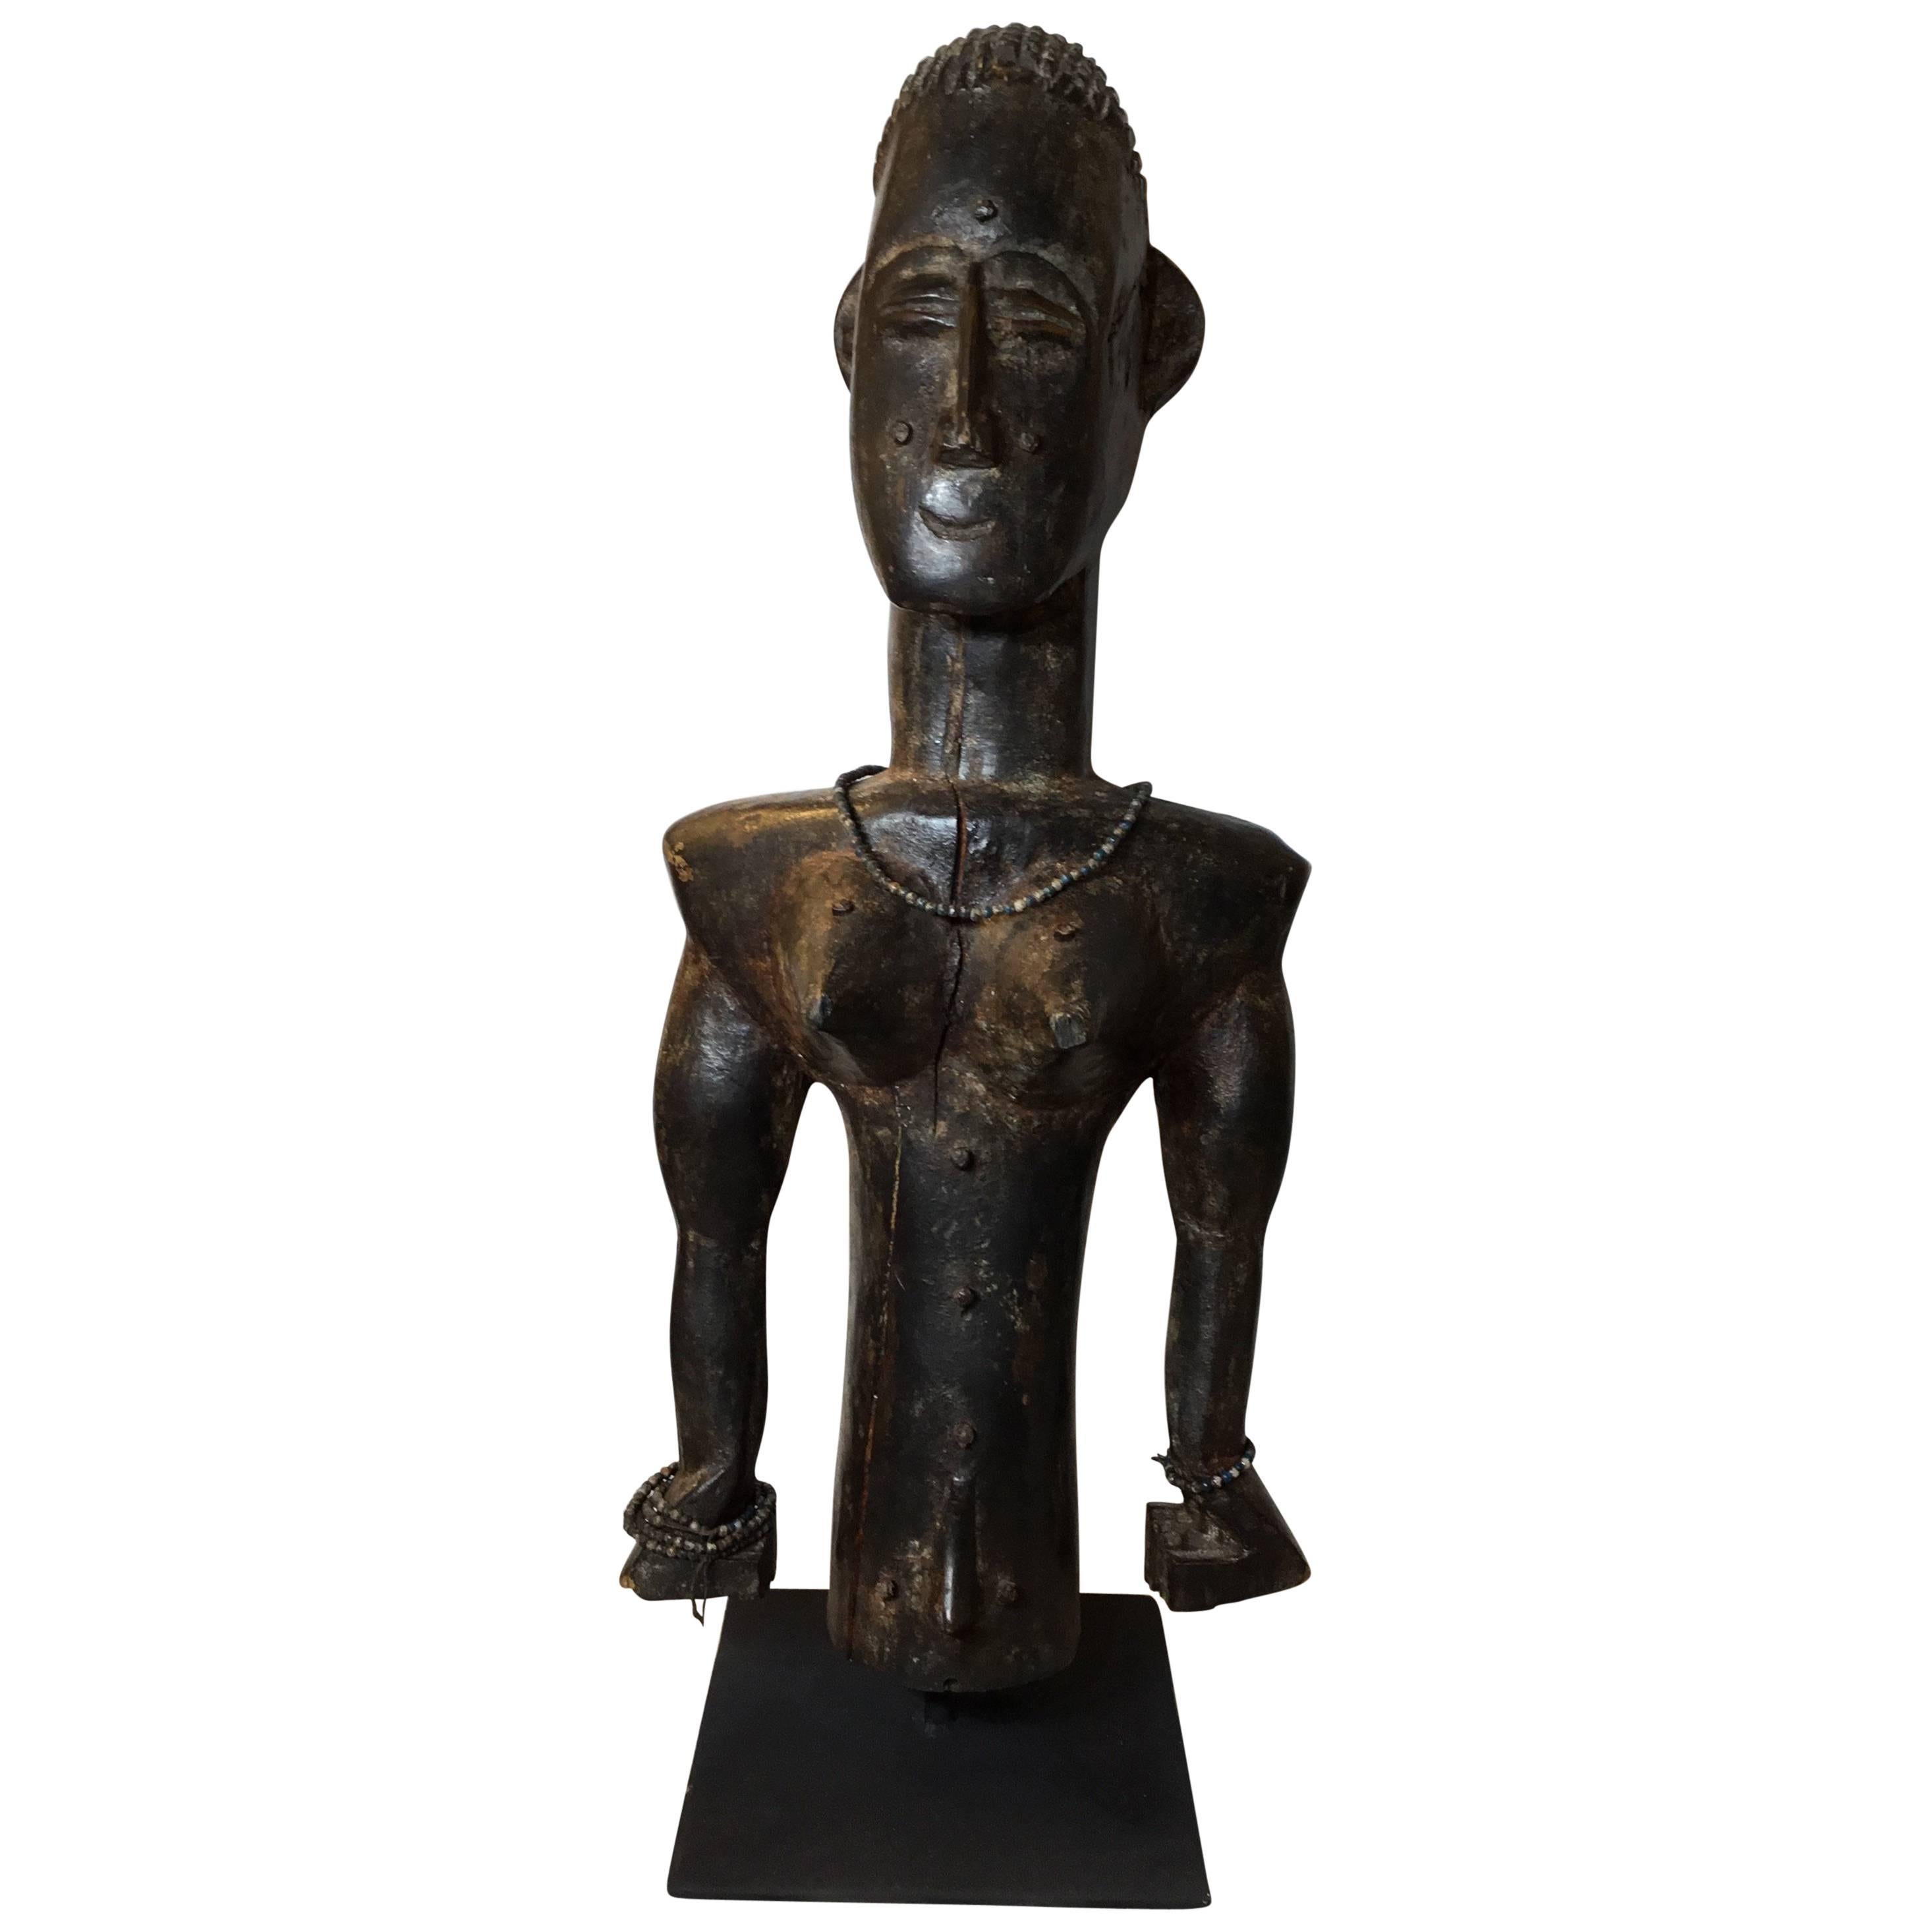 Male Warrior Figure from the Ivory Coast